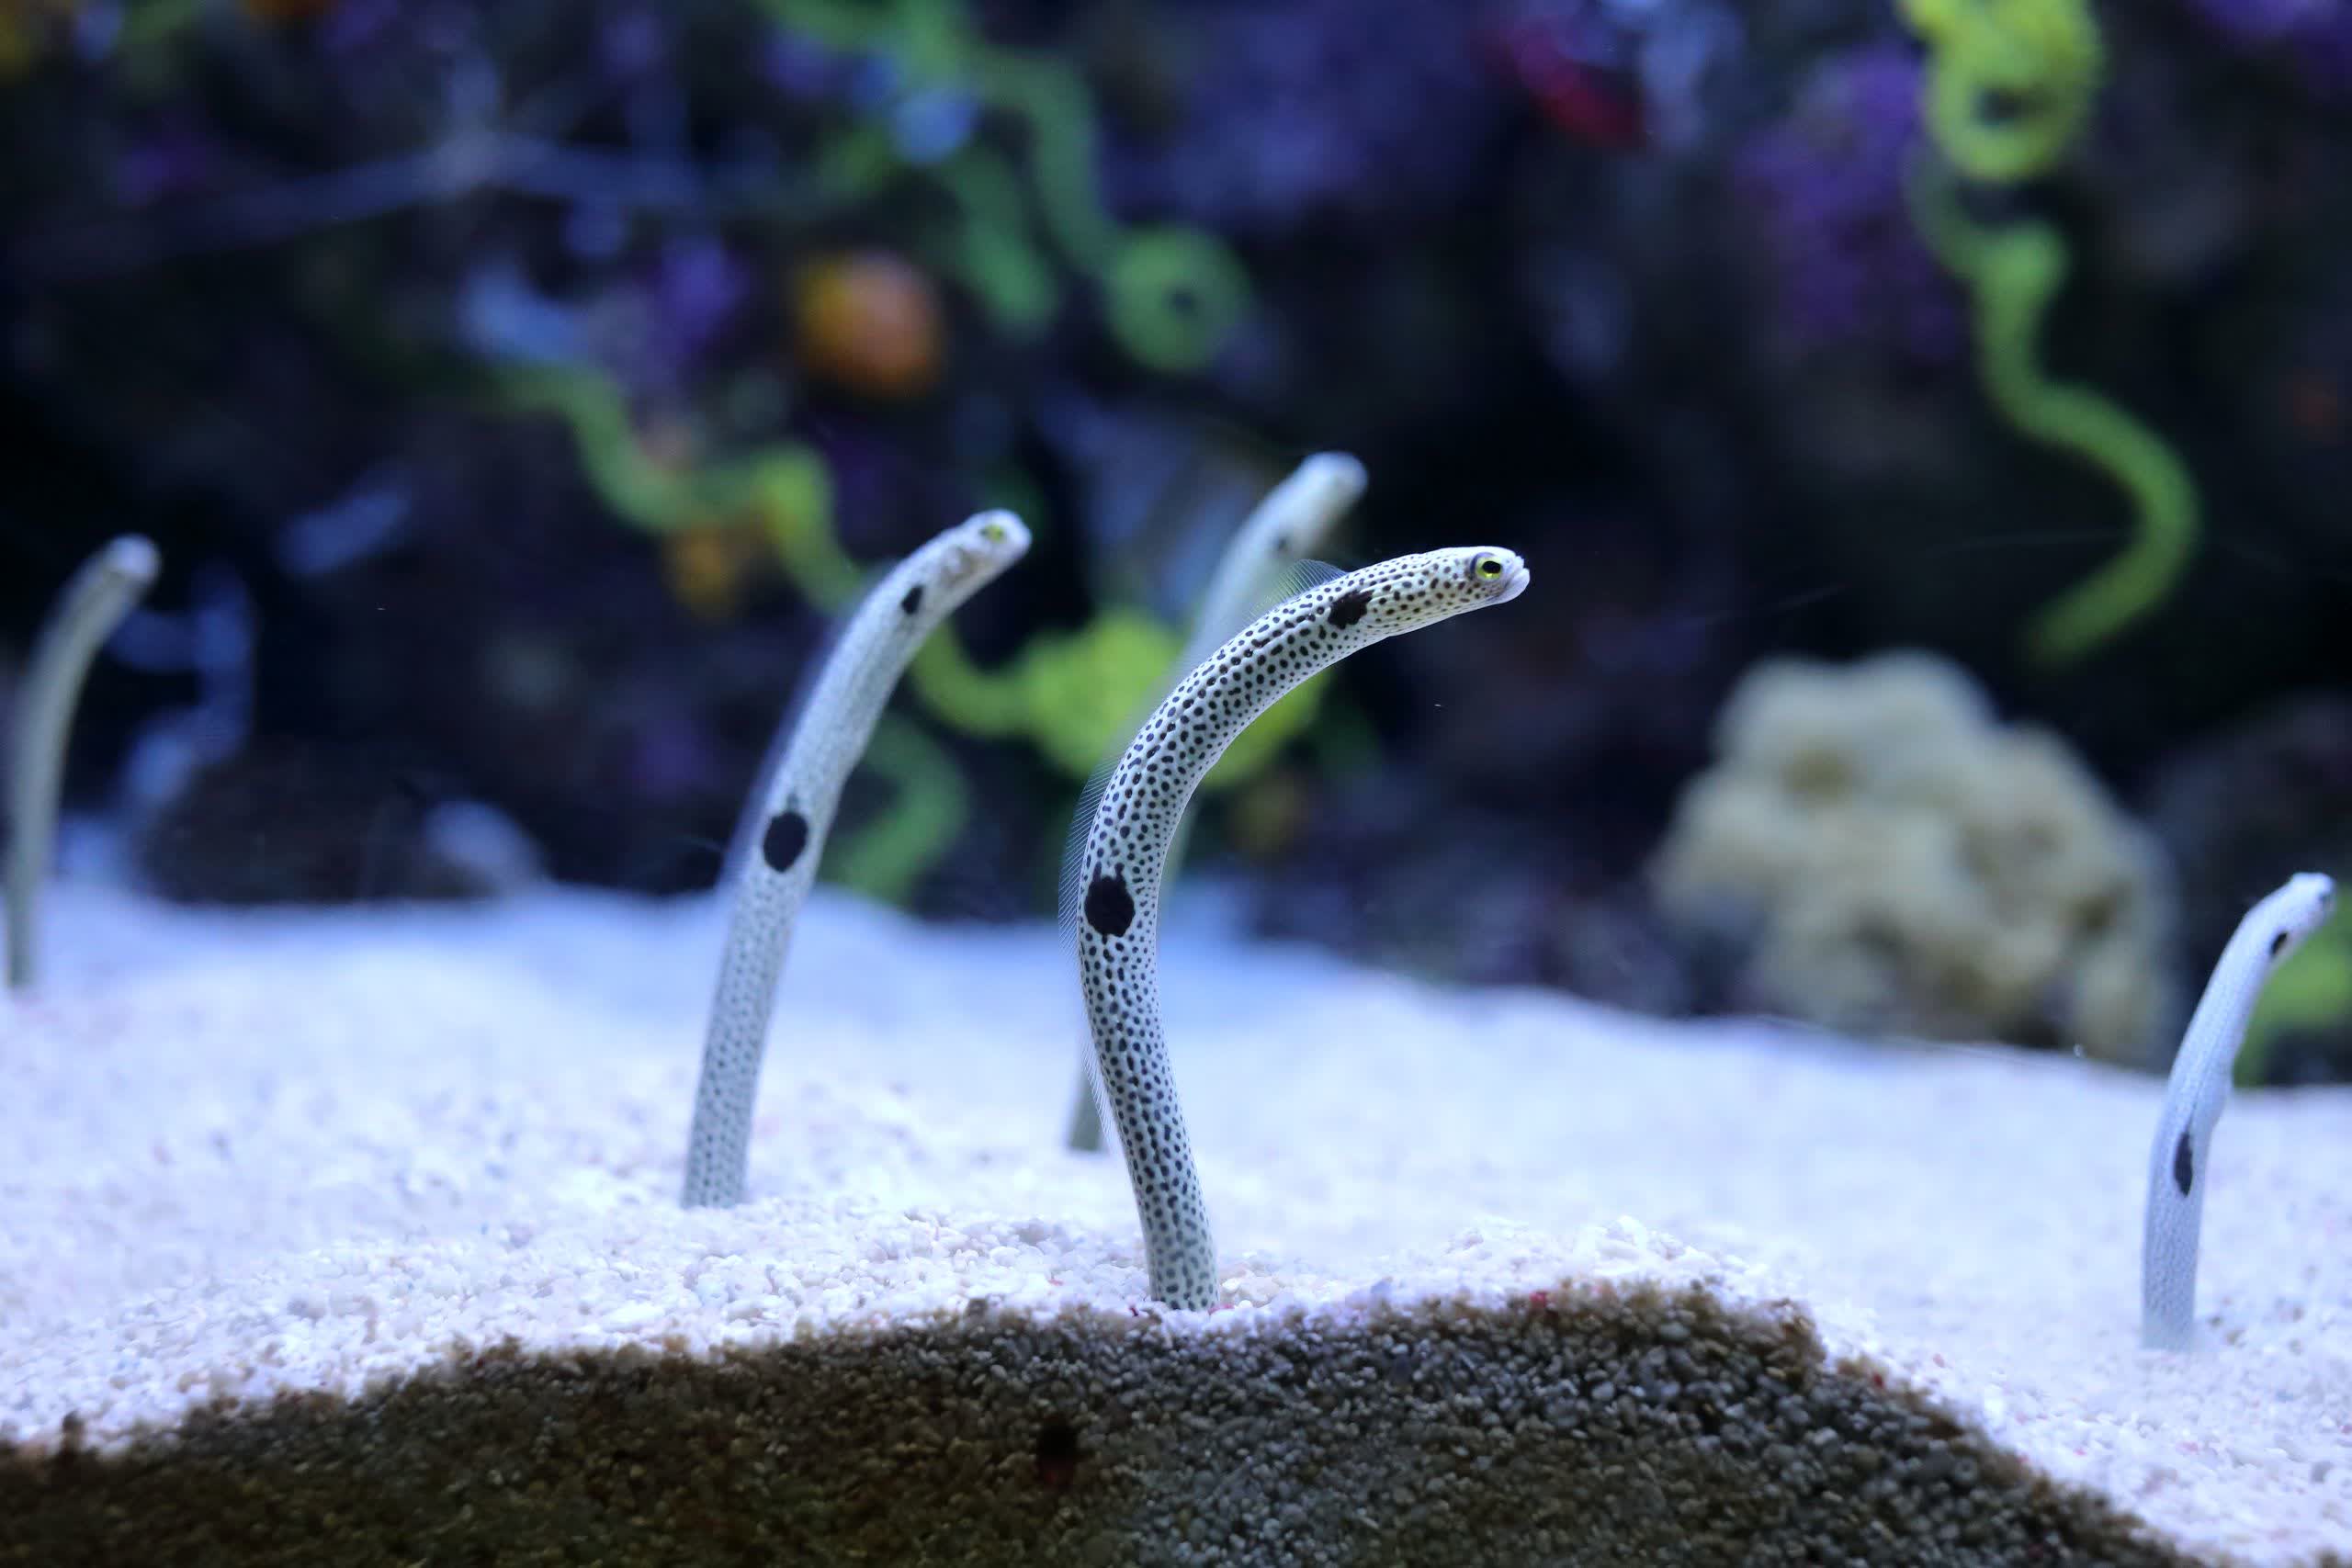 A Japanese data center is using waste heat to farm eels